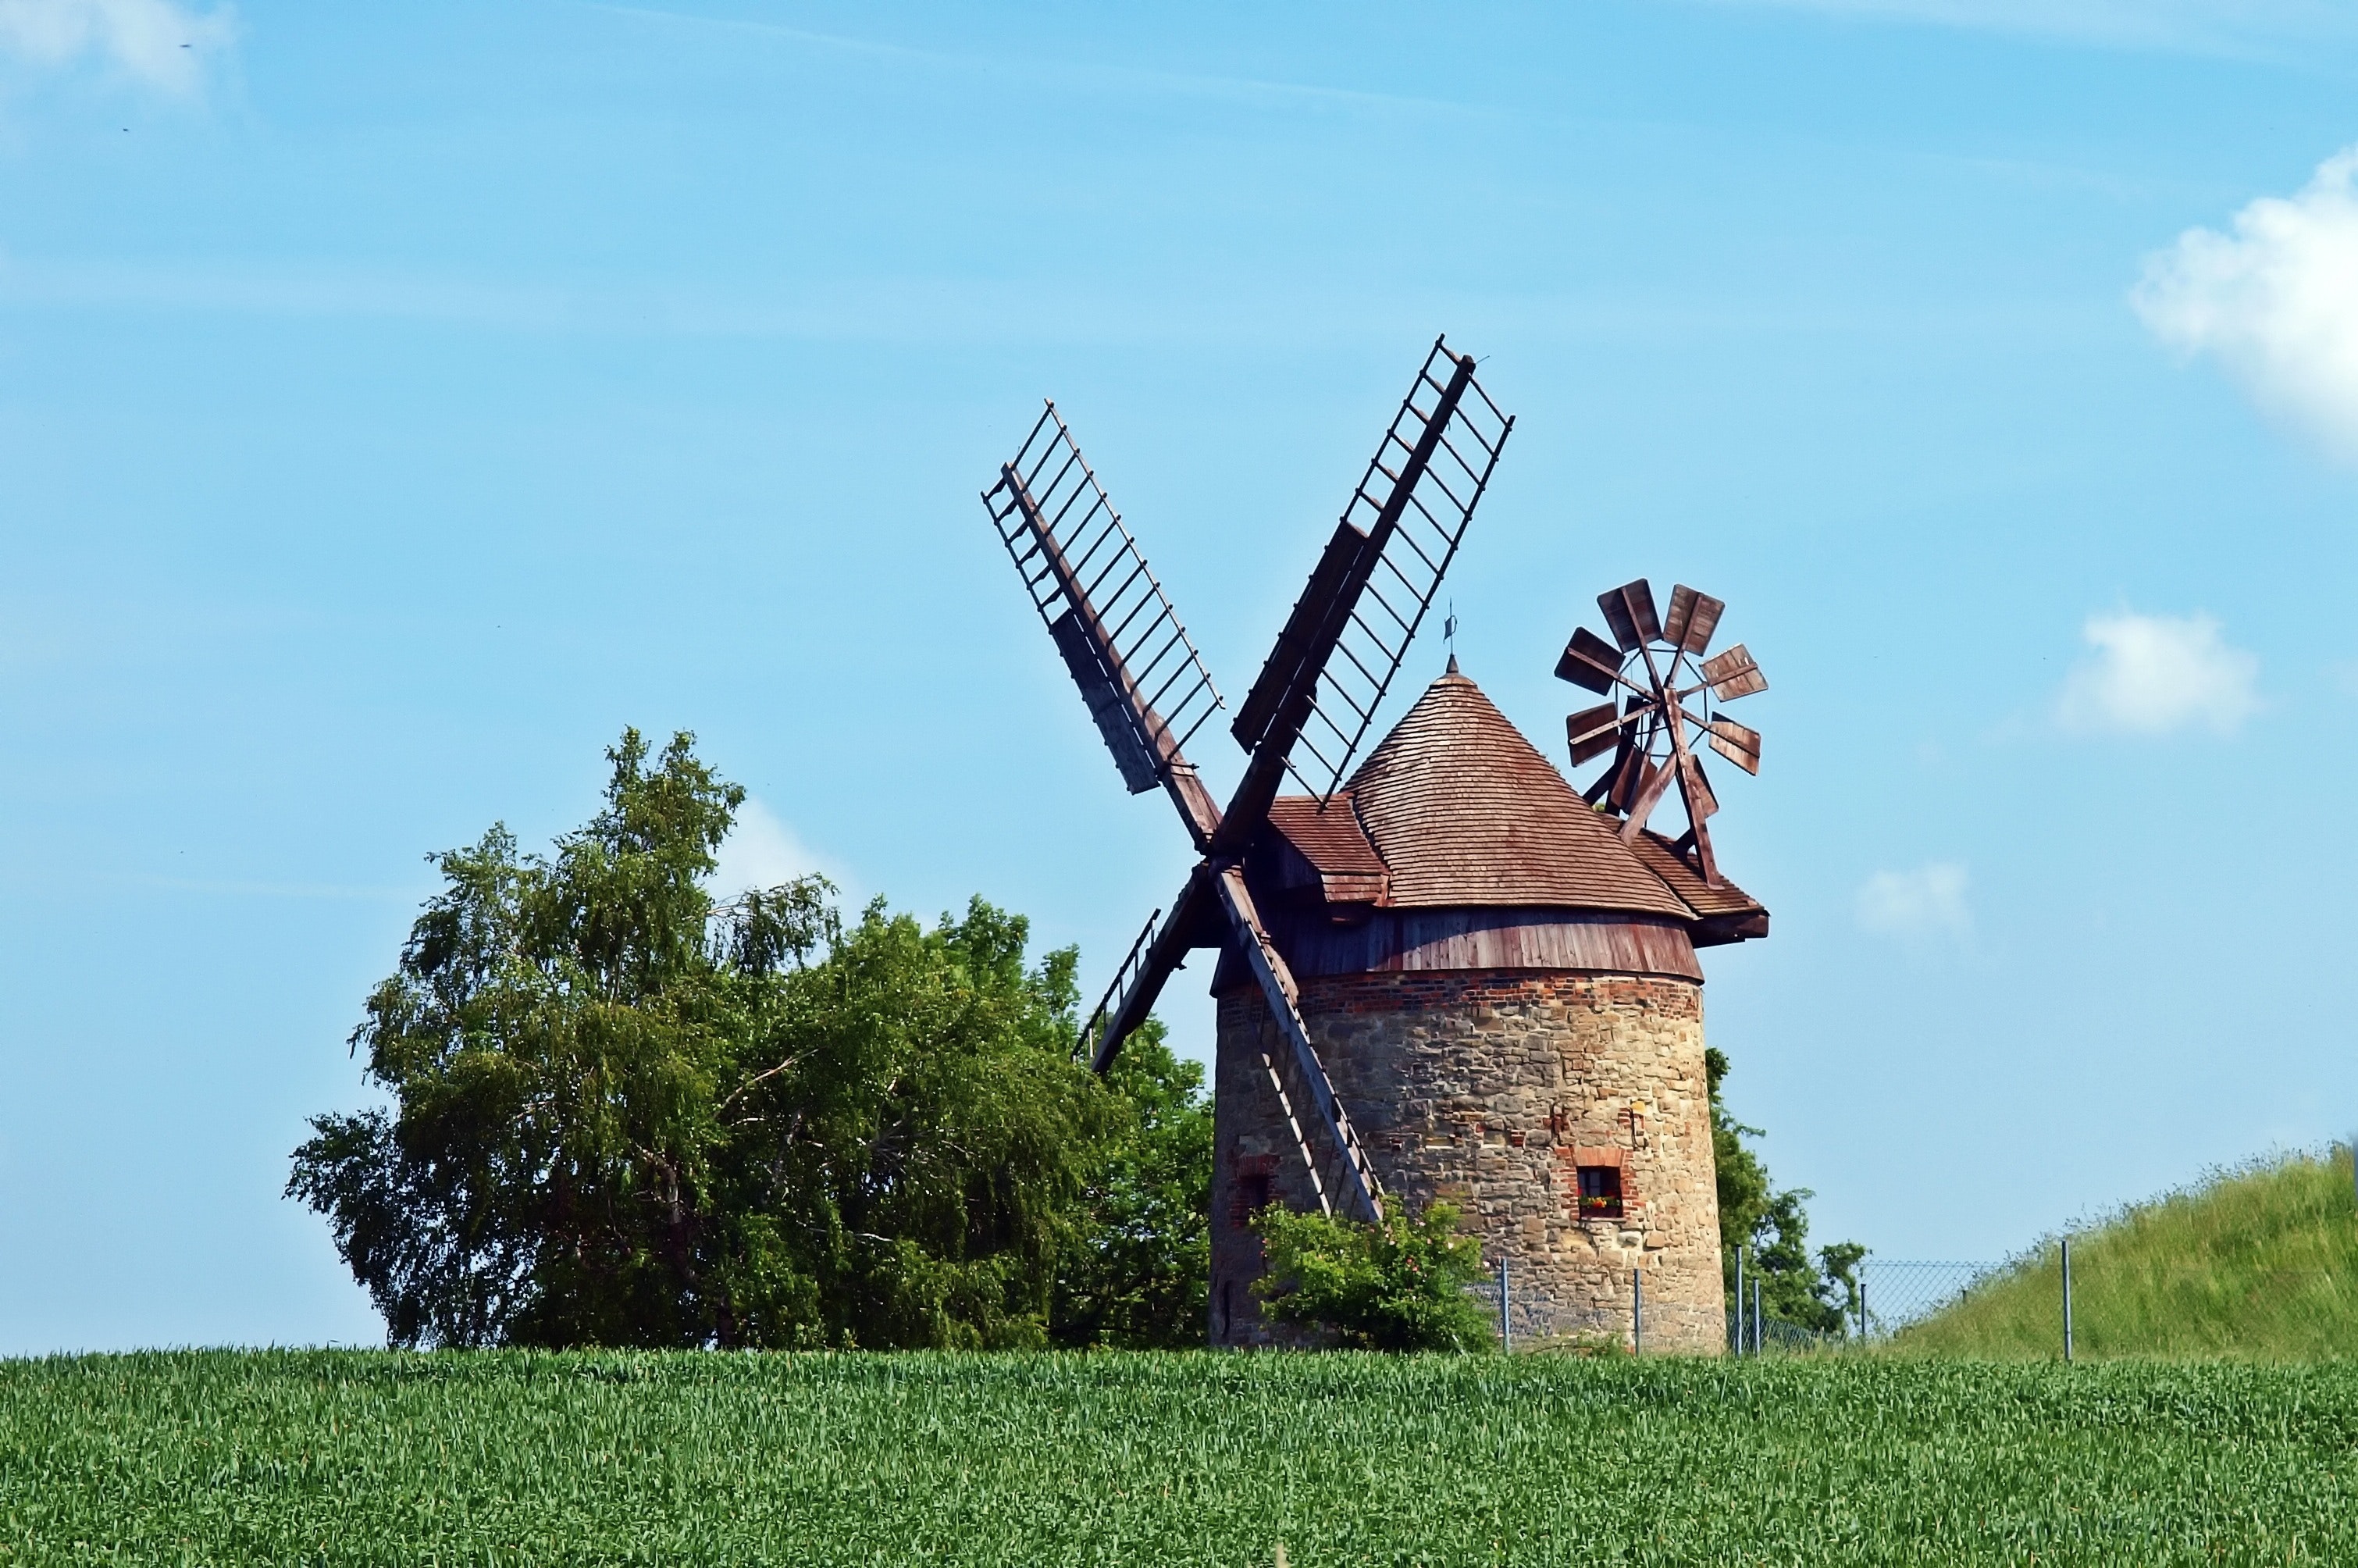 Brown and gray windmill beside green tree under blue cloudy sky during day time photo